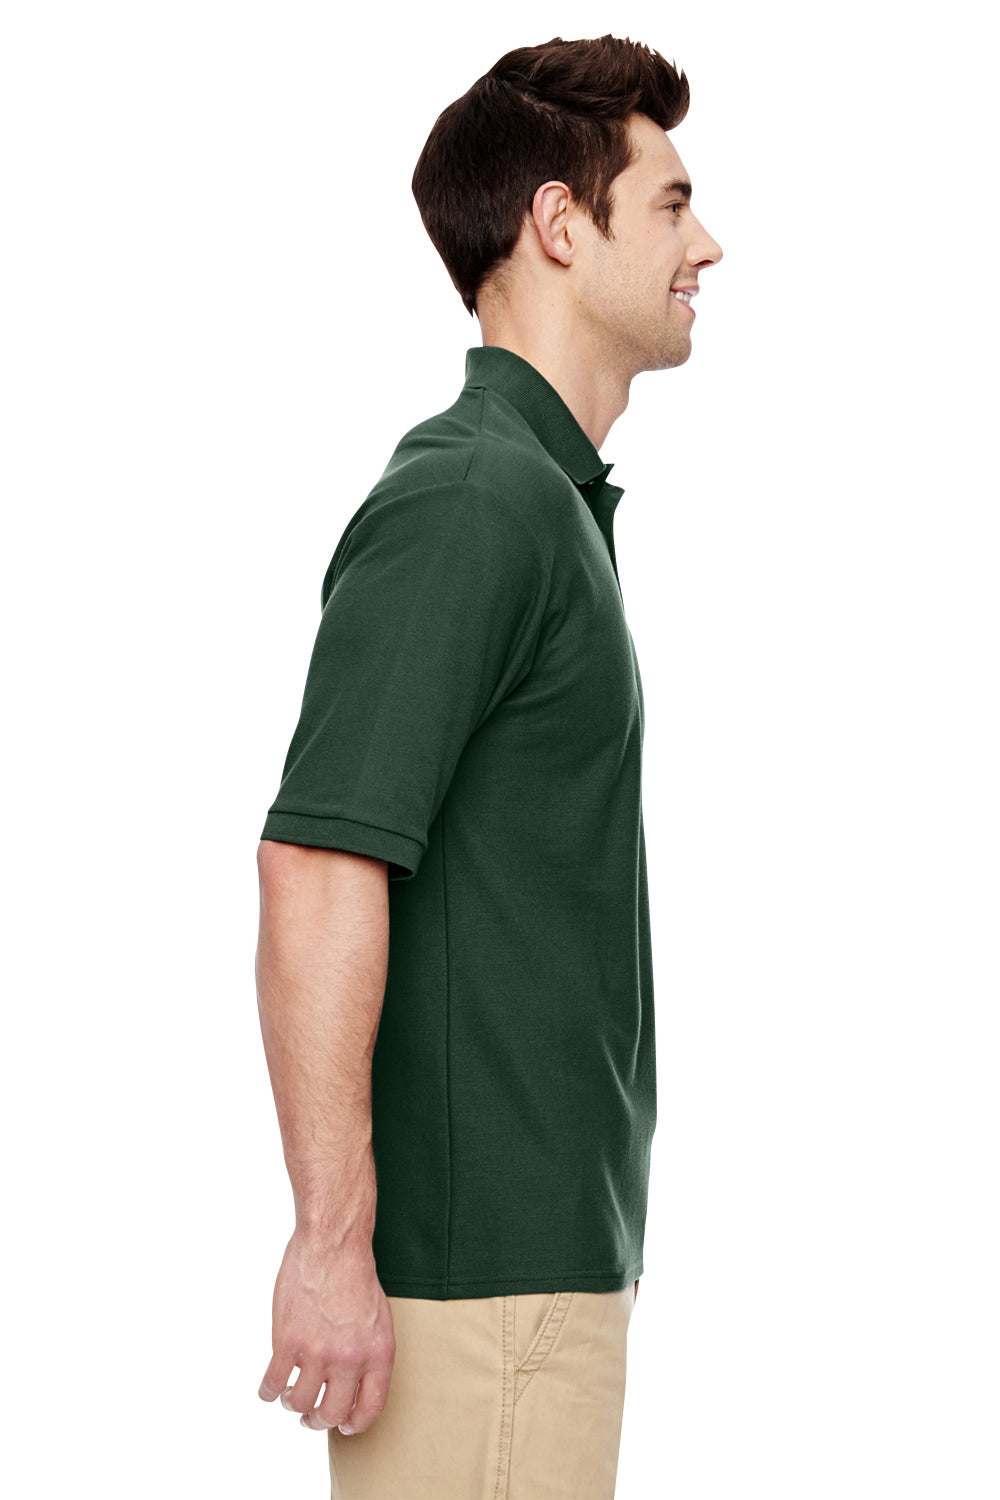 Jerzees 537MSR Mens Easy Care Moisture Wicking Short Sleeve Polo Shirt Forest Green Side